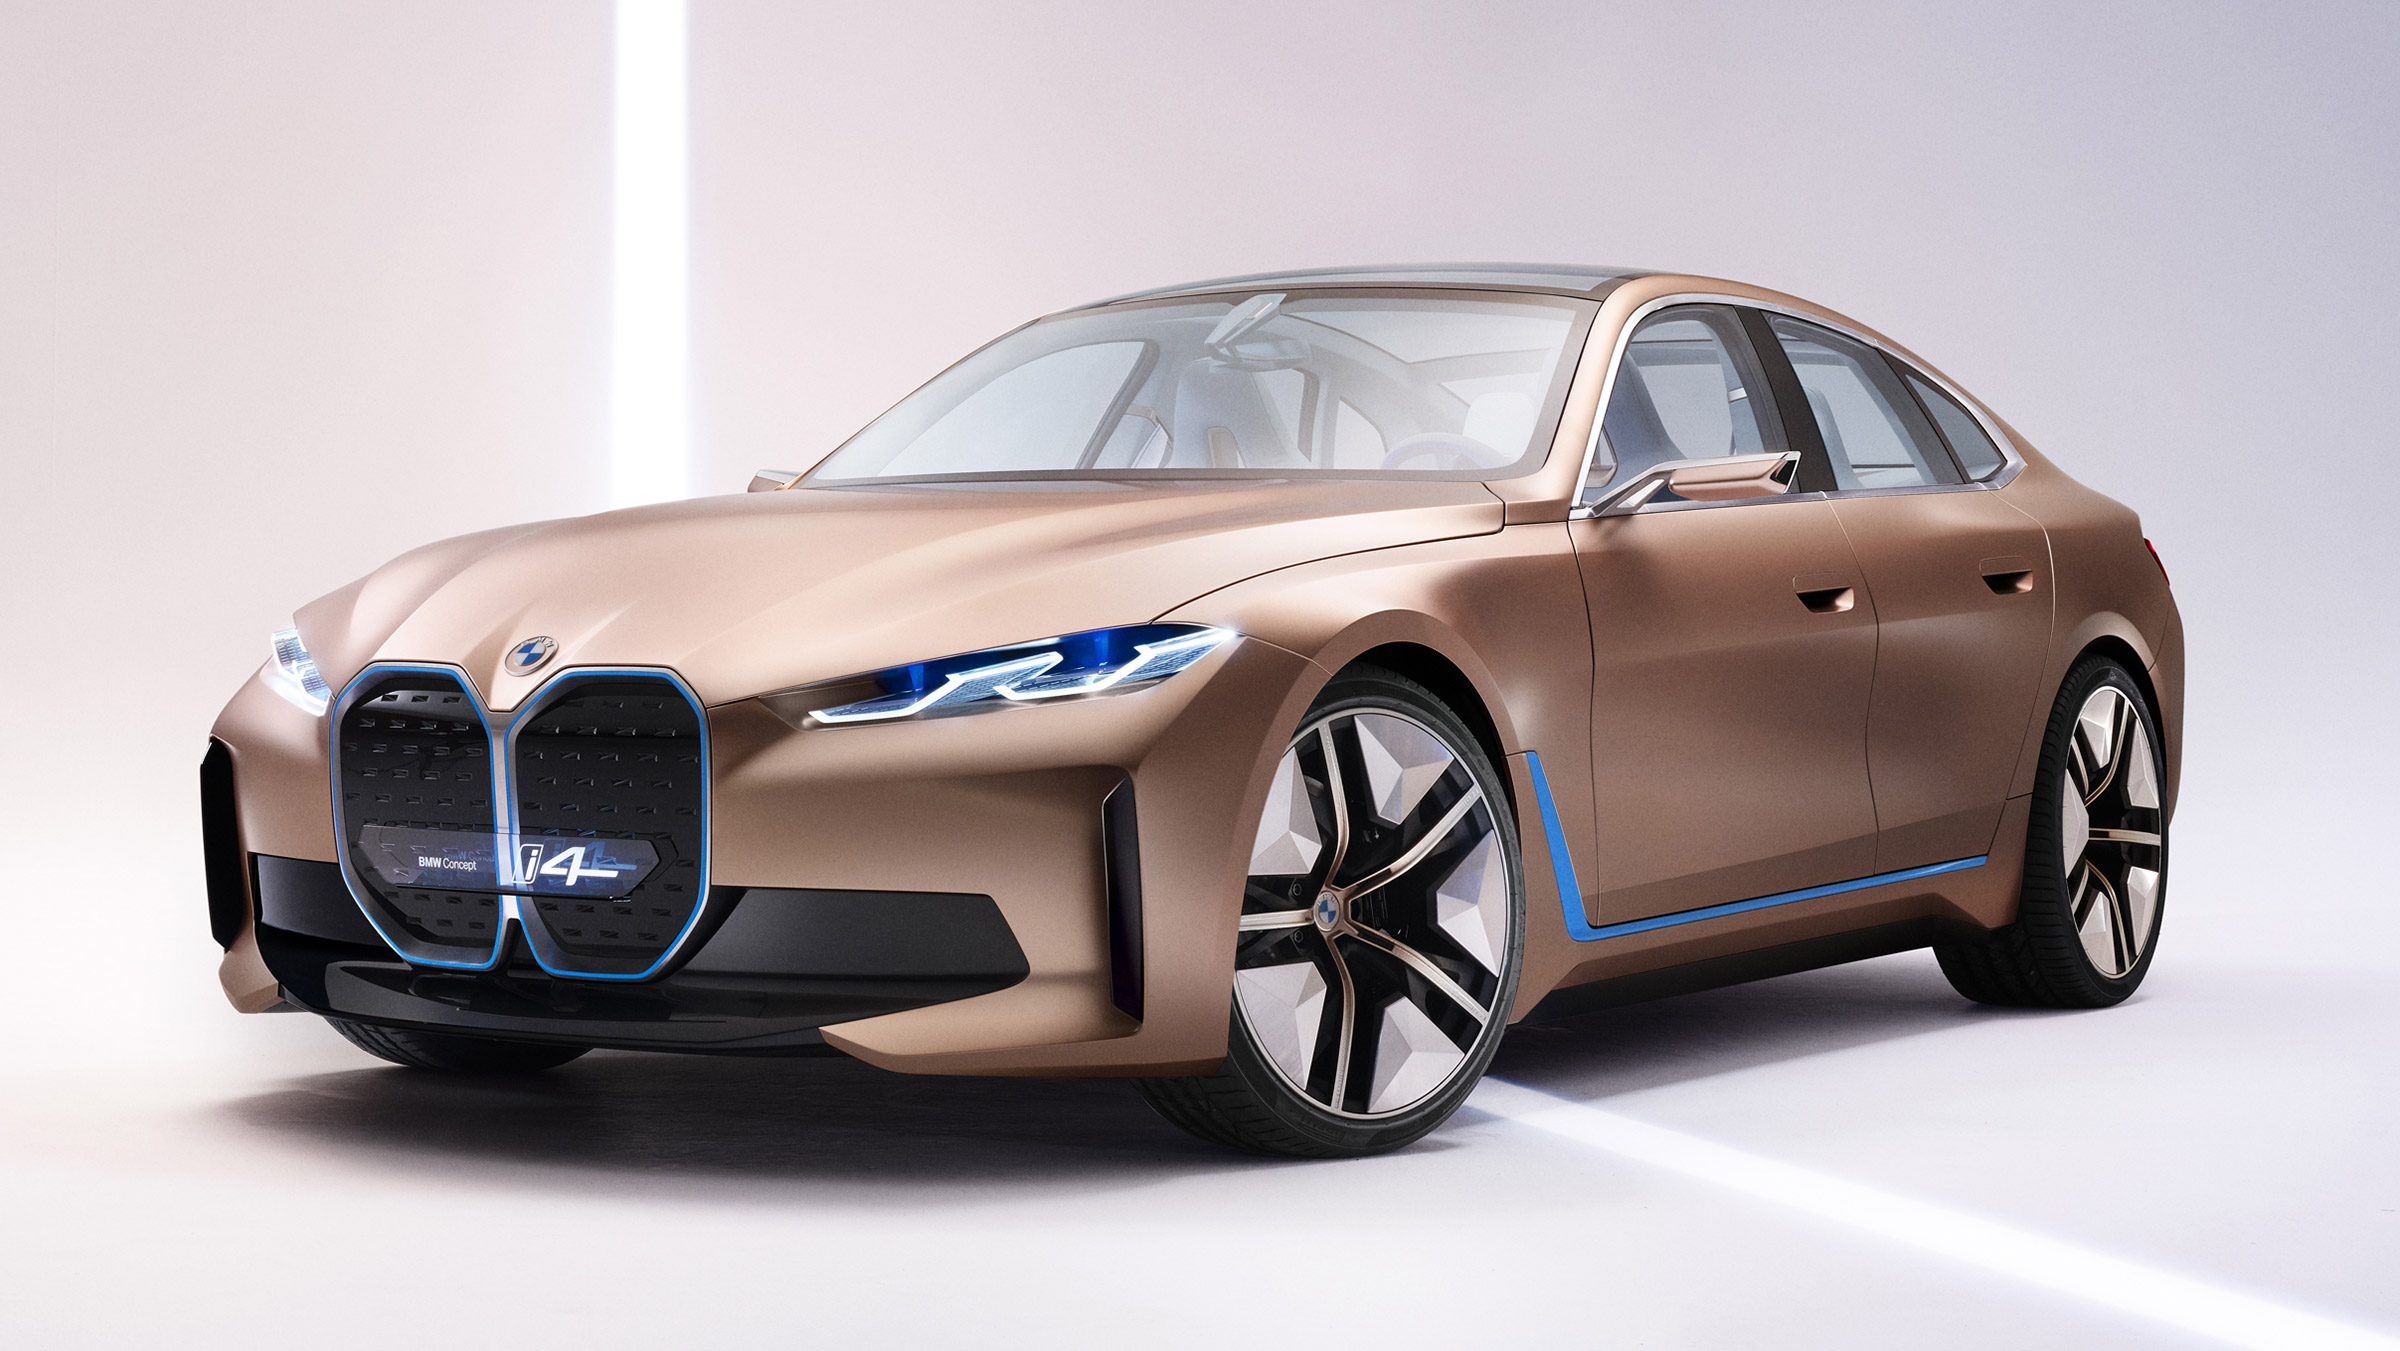 New 2021 BMW i4 prices, specs and release date Auto Express